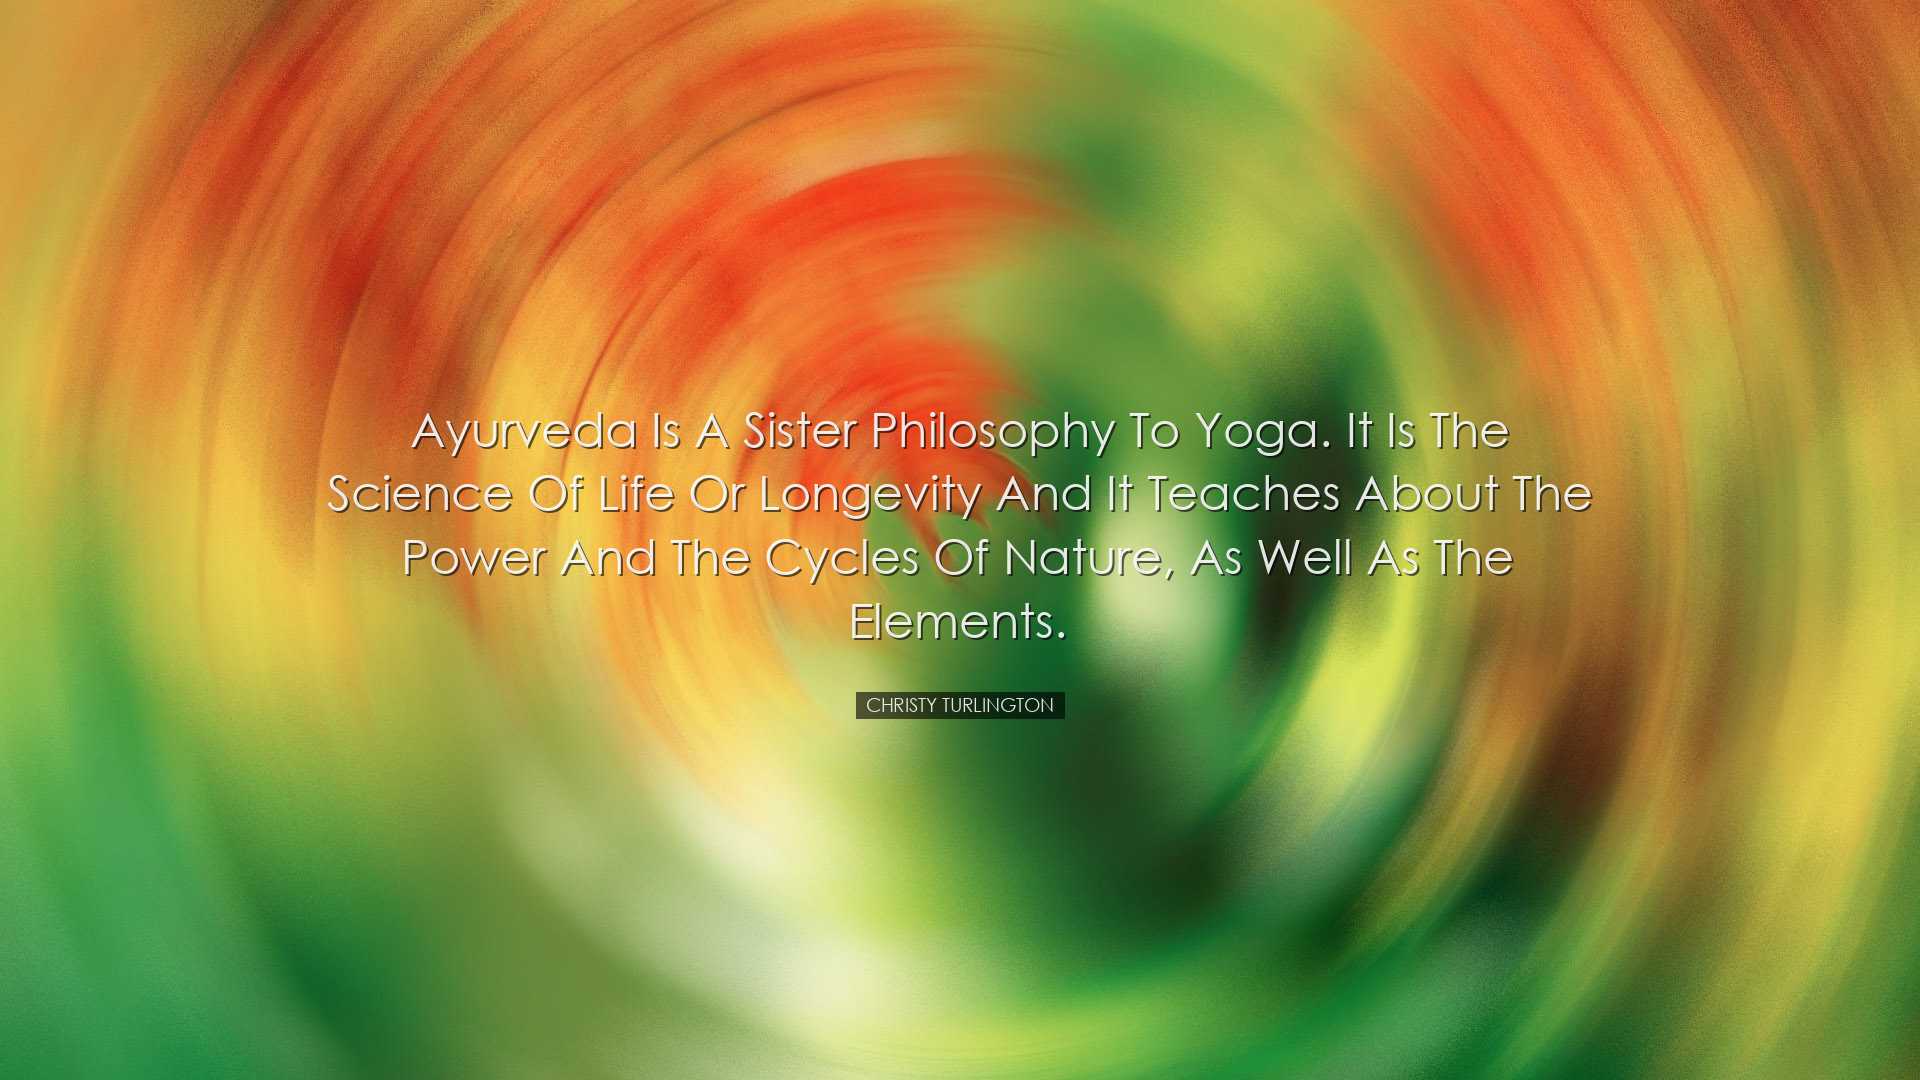 Ayurveda is a sister philosophy to yoga. It is the science of life